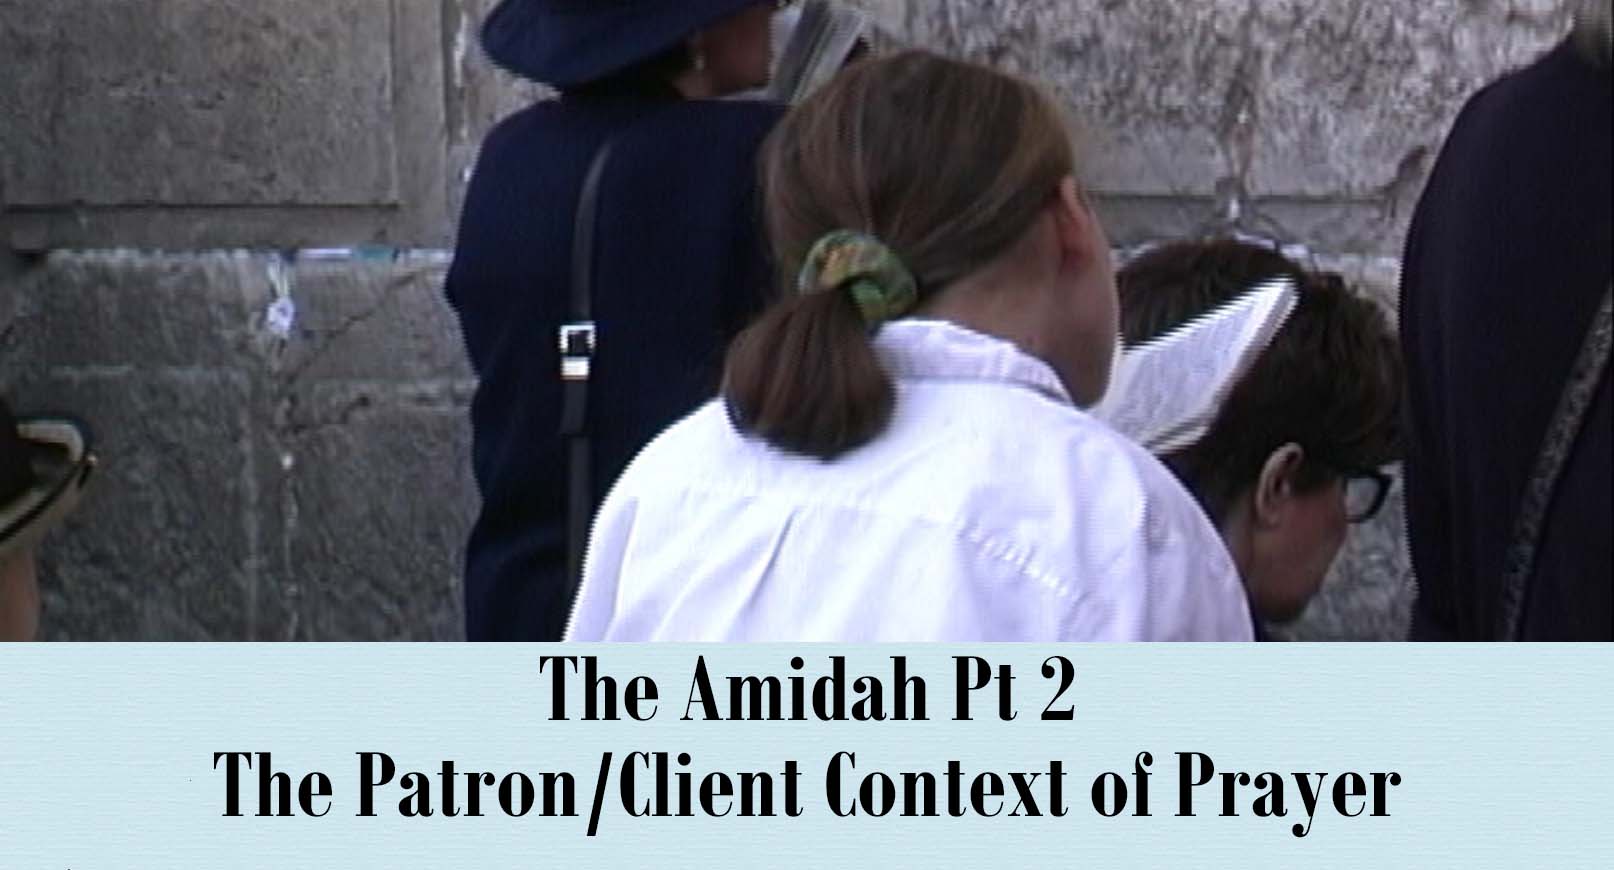 The Amidah: Approaching God as King and Provider